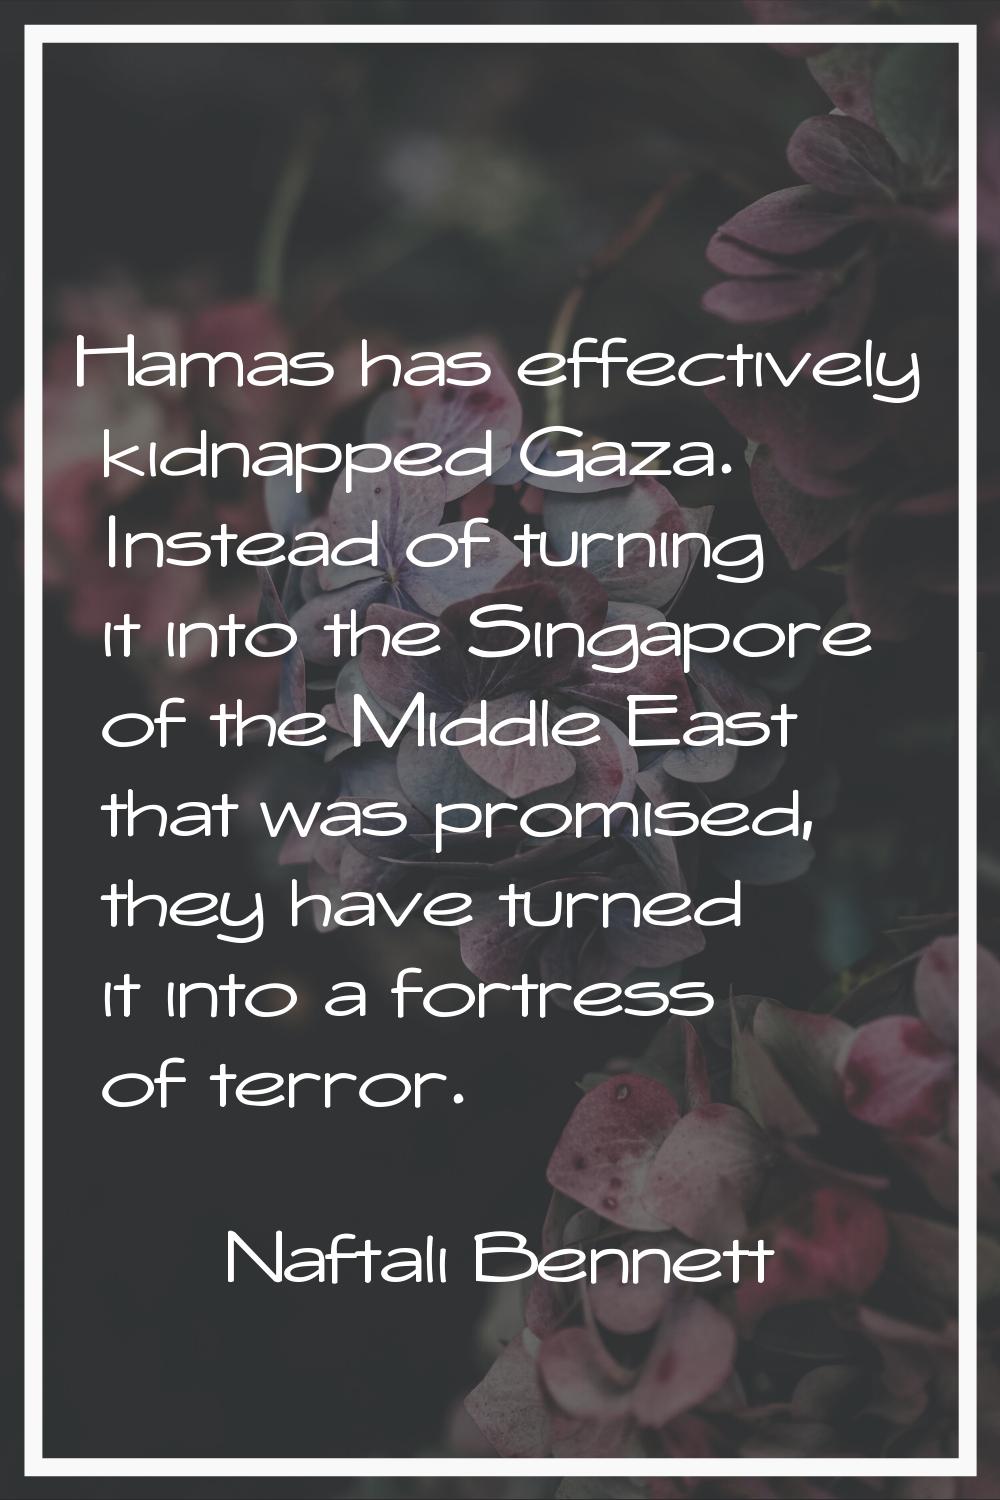 Hamas has effectively kidnapped Gaza. Instead of turning it into the Singapore of the Middle East t